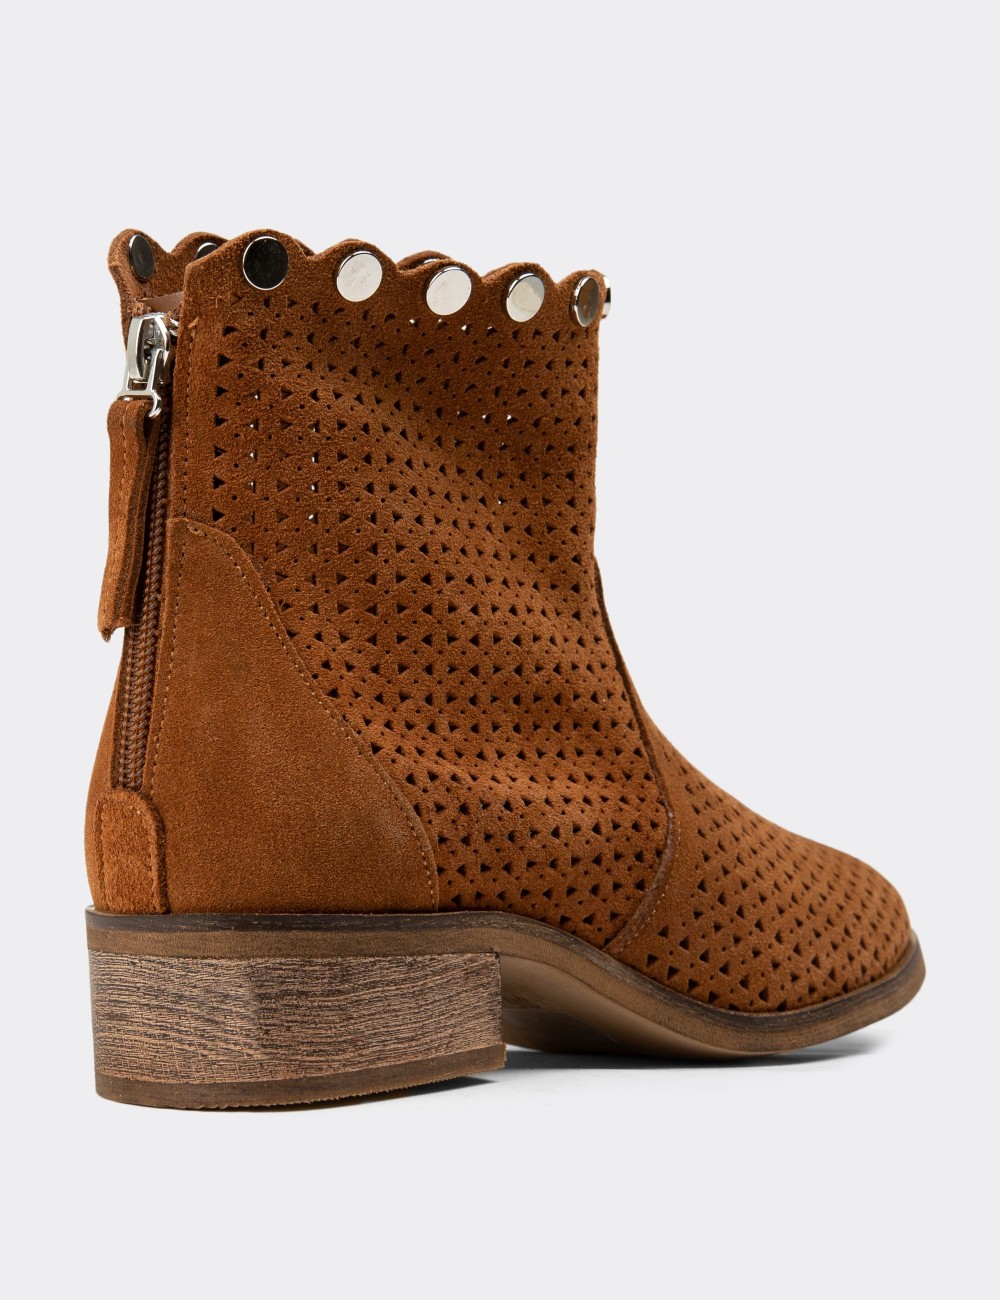 Tan Suede Leather Summer Boots - R8592ZTBAM01